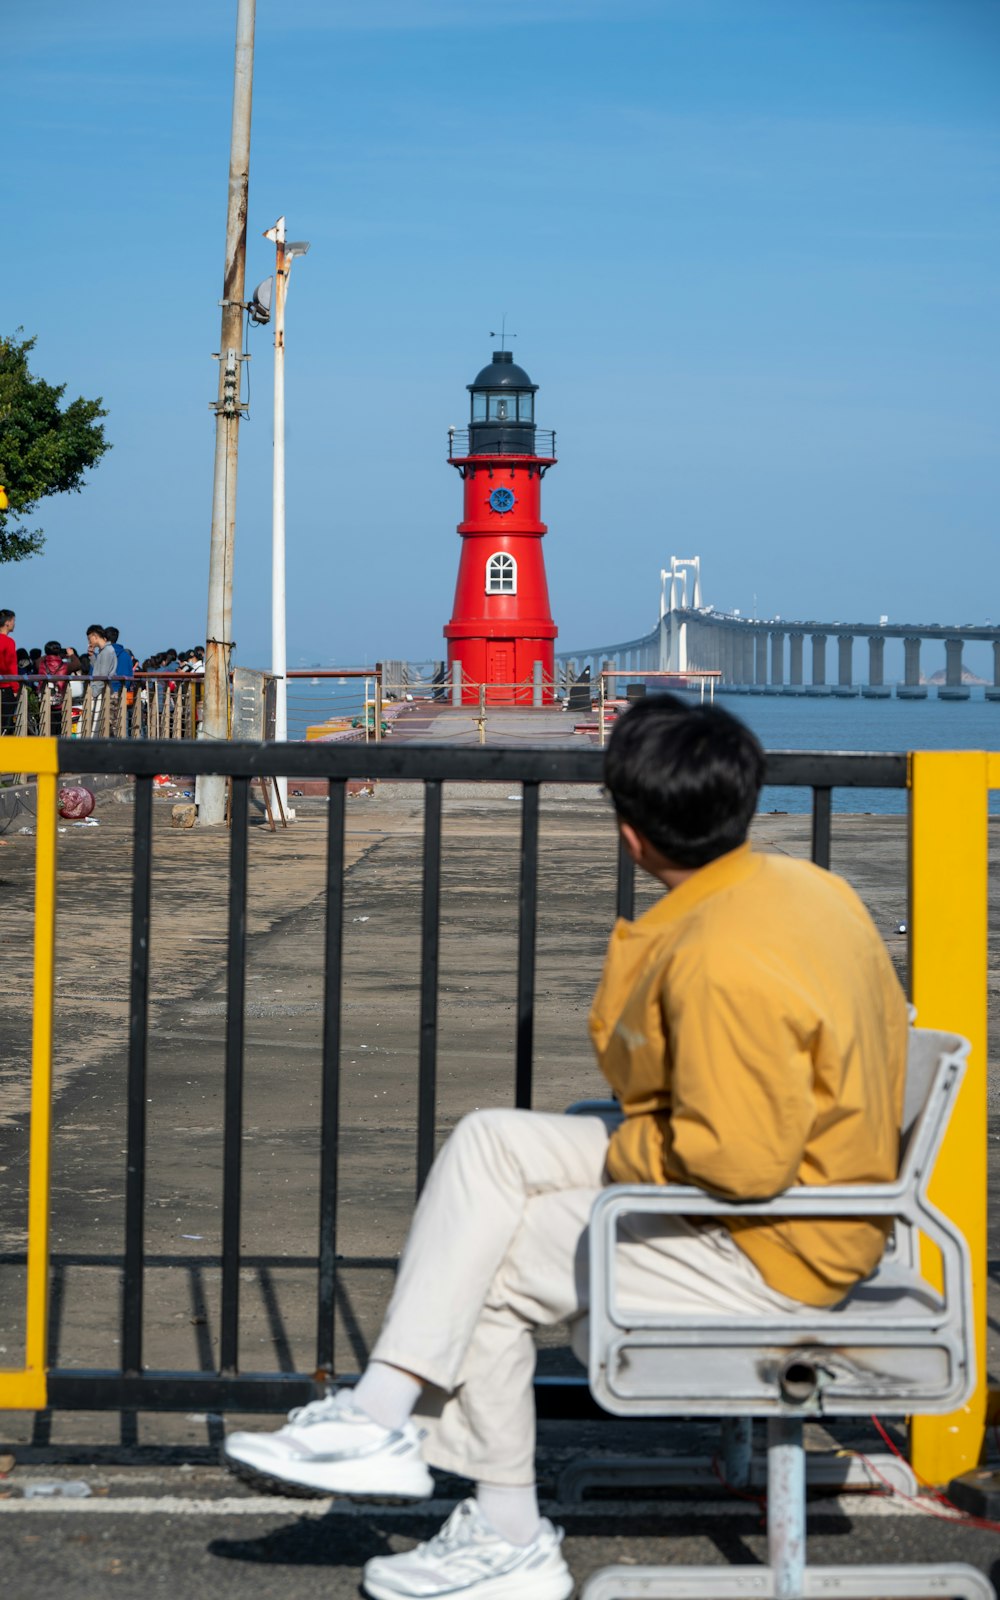 a man sitting on a bench next to a red light house